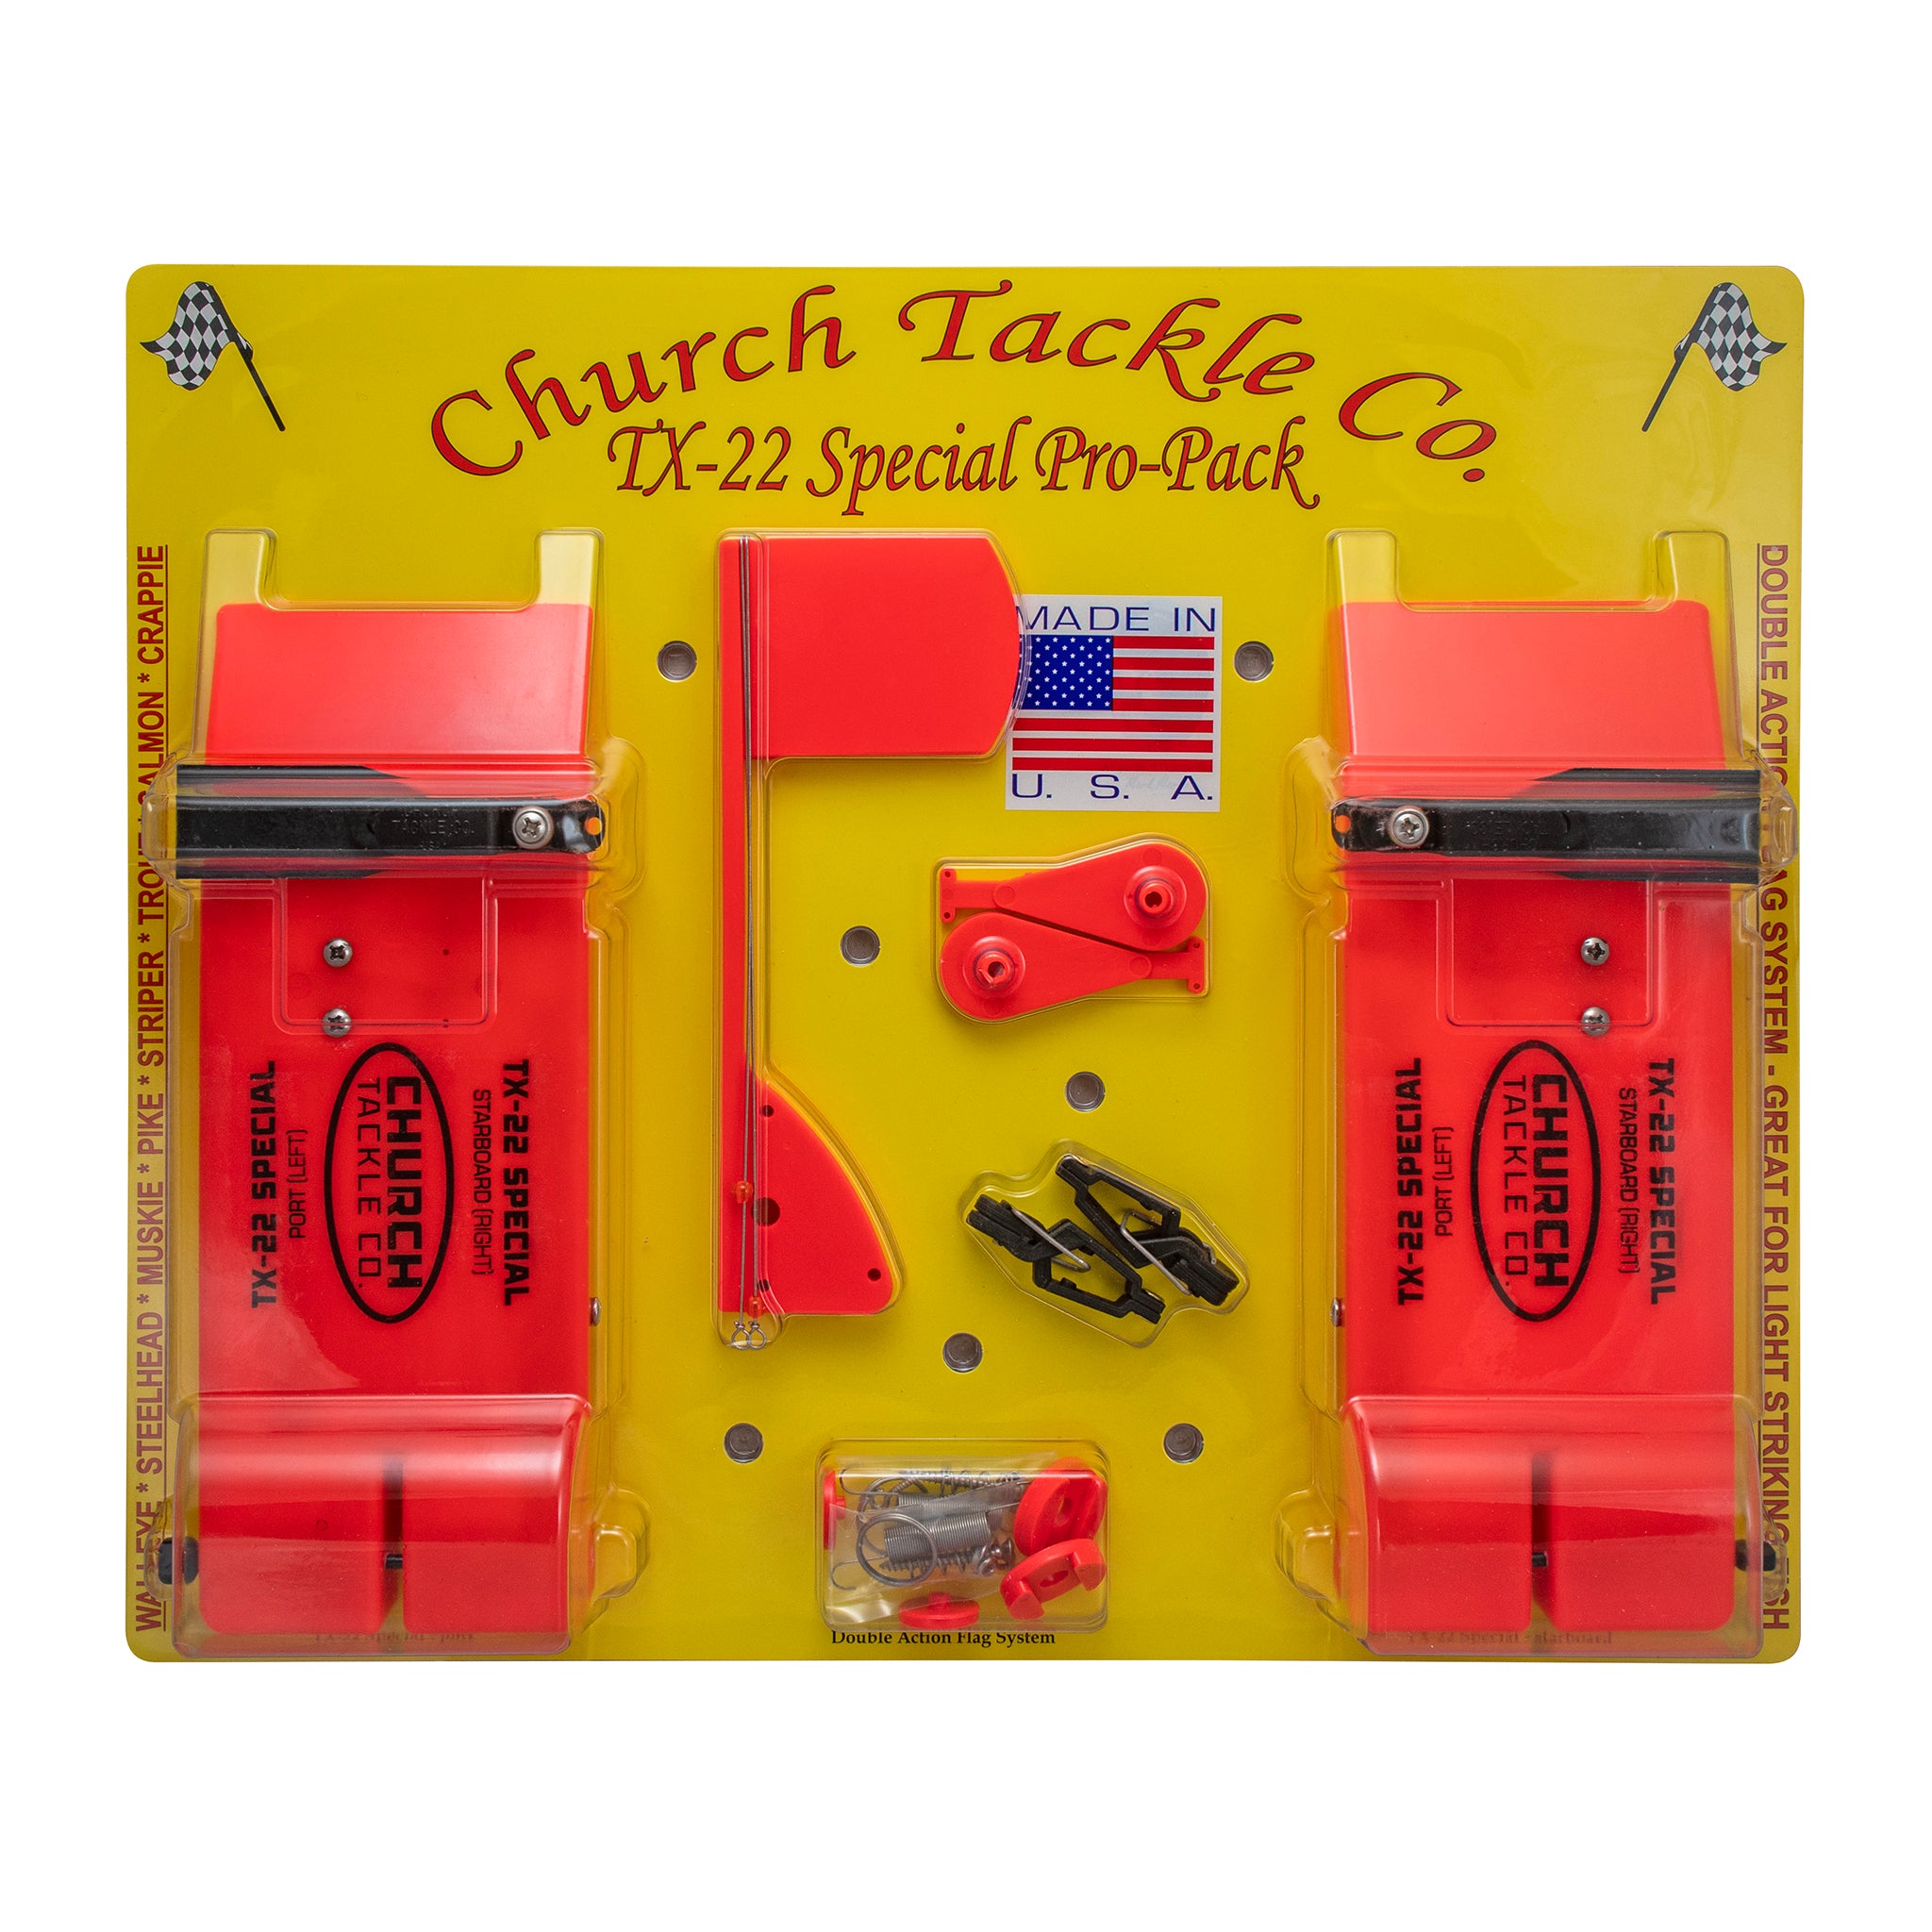 Church Tackle TX-22 Pro-Pack